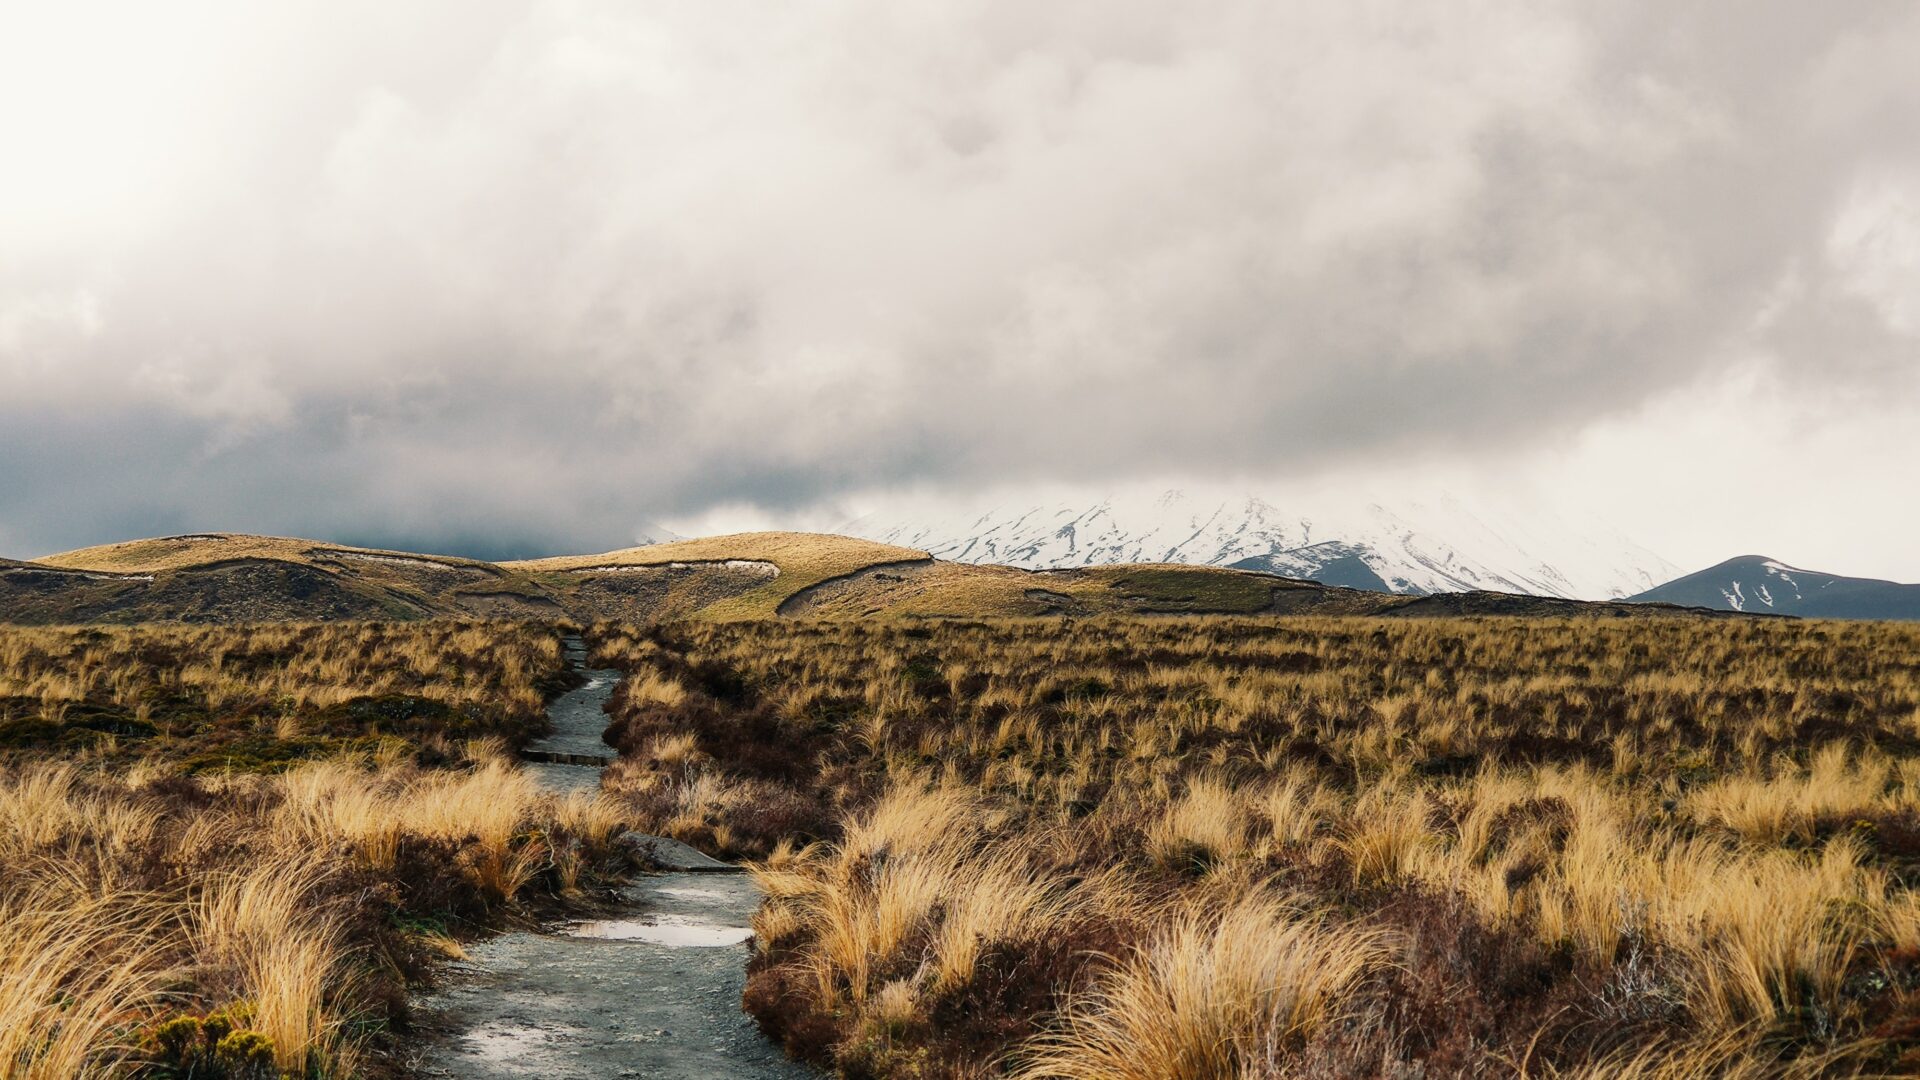 The Central Plateau New Zealand